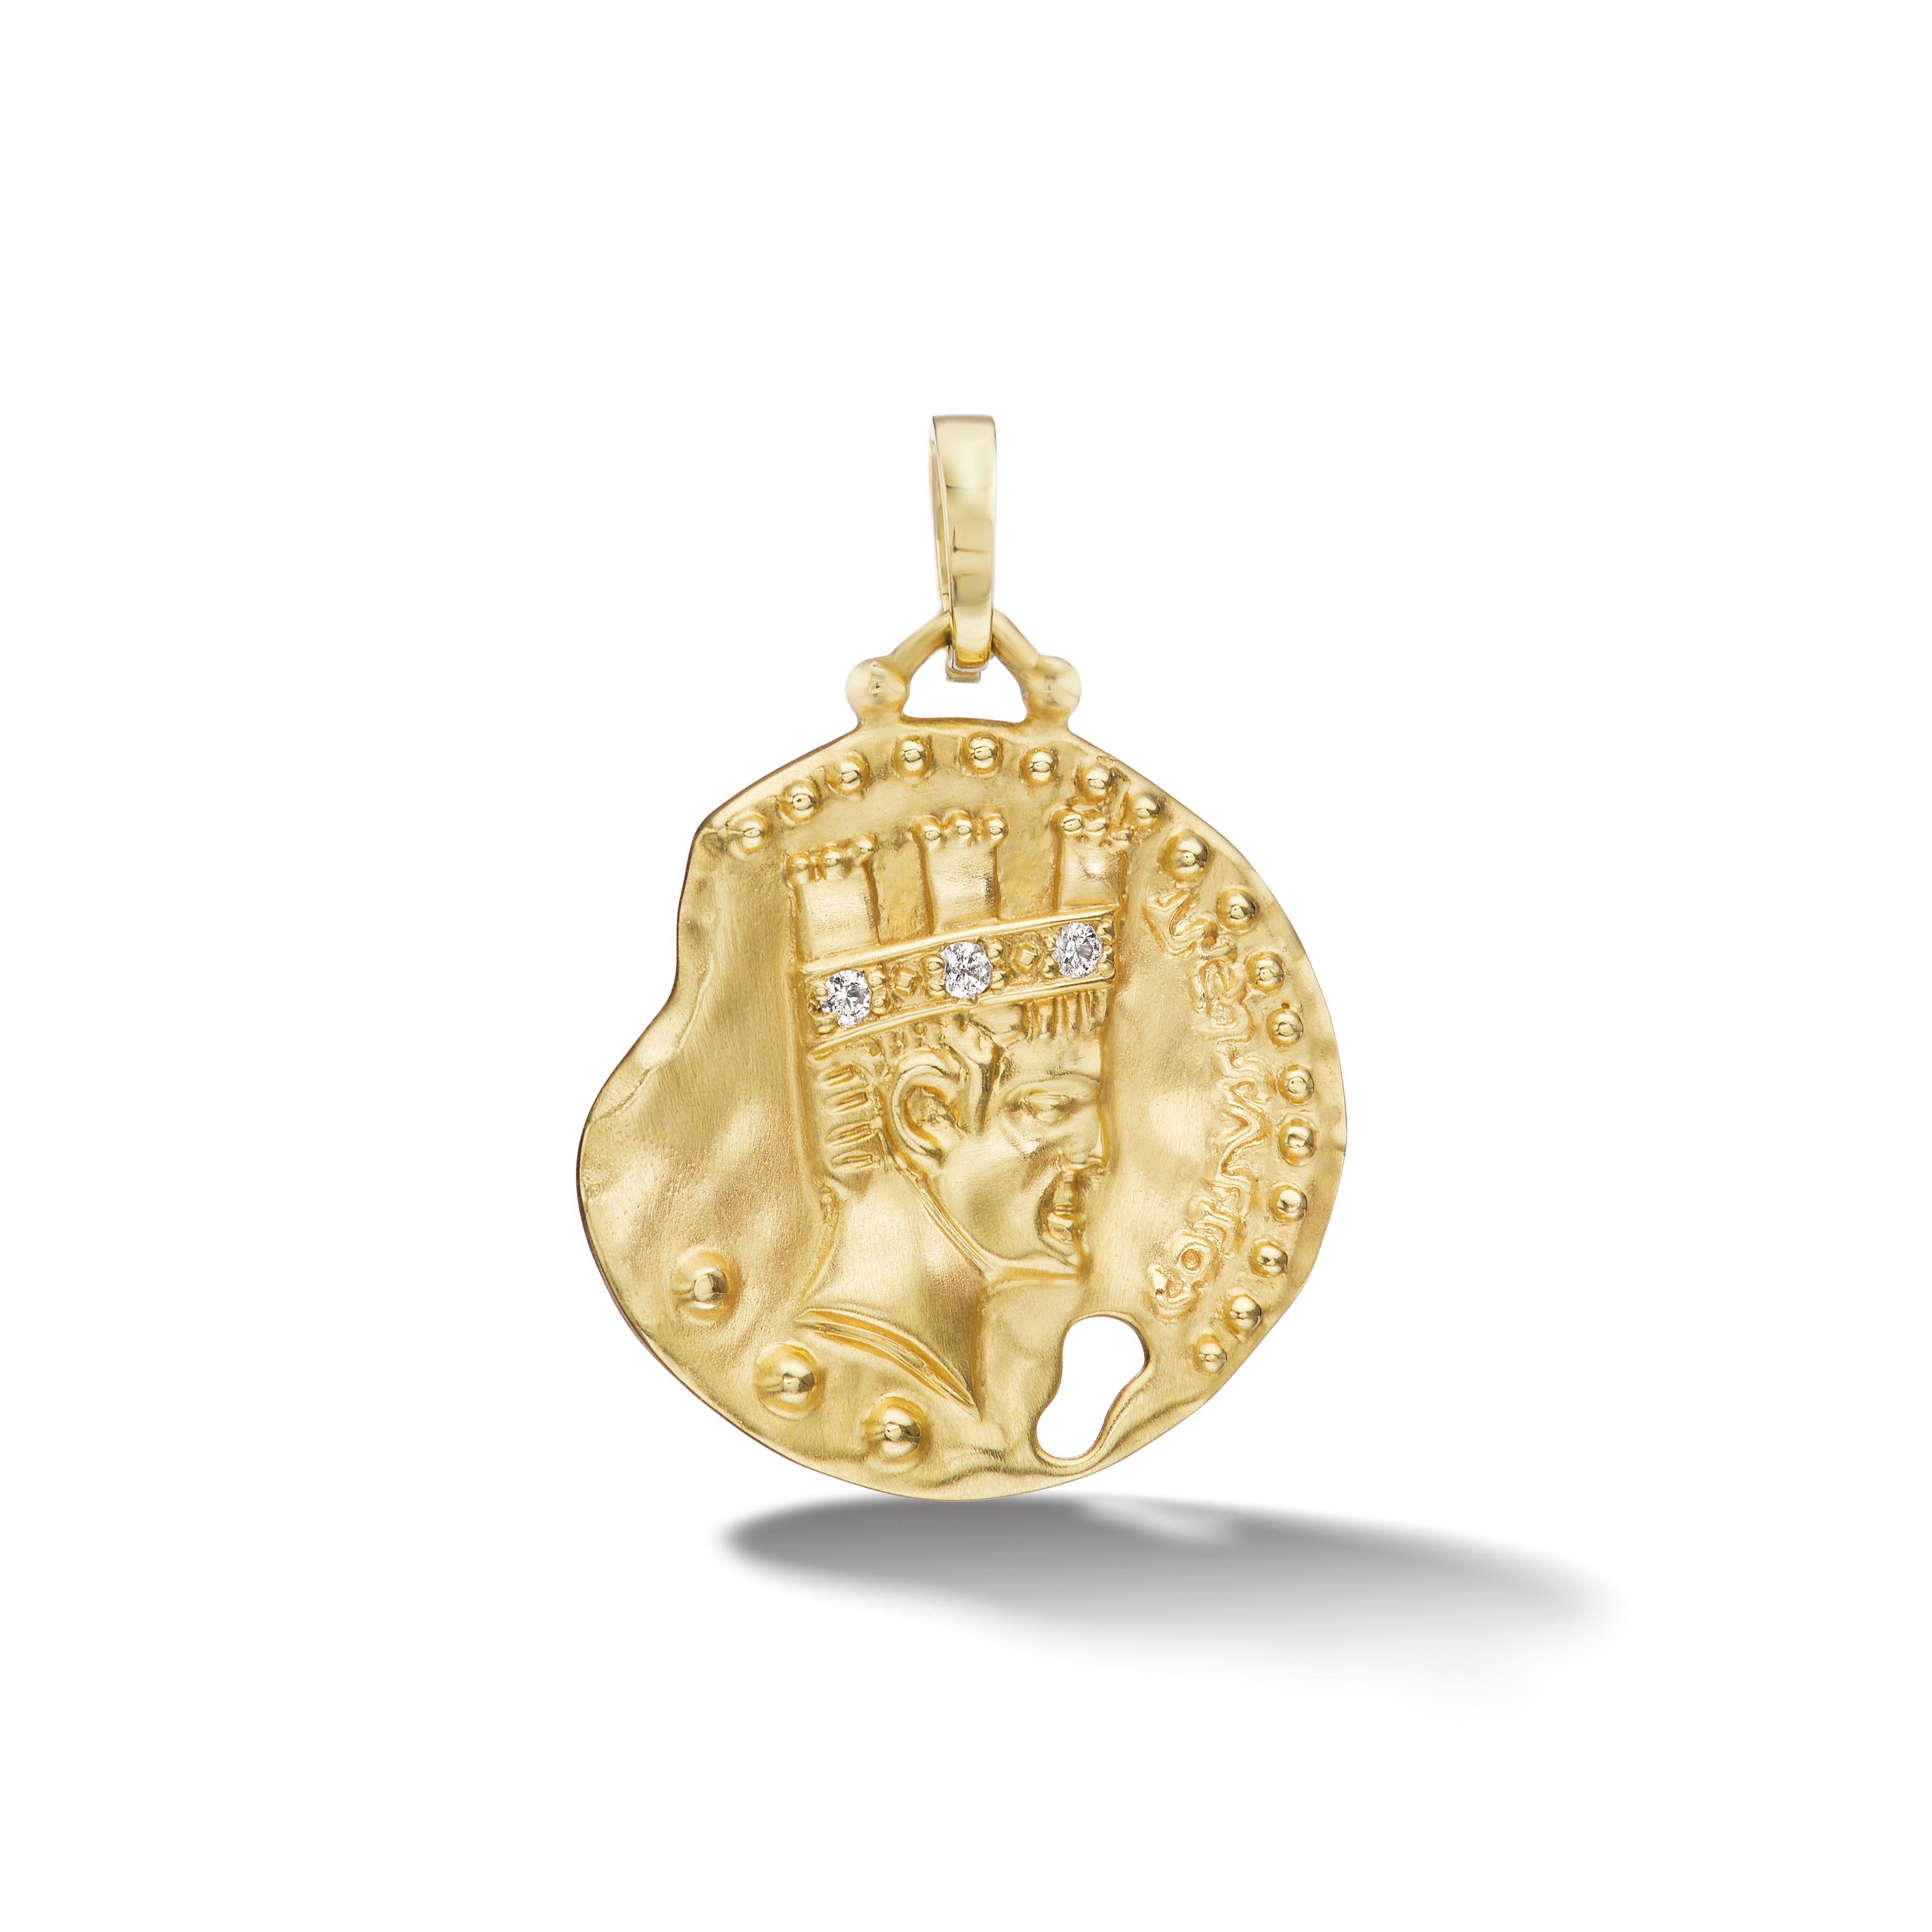 
The Naval Crown Coin is influenced by an ancient Roman coin that depicts a Roman naval commander, wearing the honor of the Naval Crown. The Naval Crown was a Roman military award consisting of a gold crown traditionally decorated with small